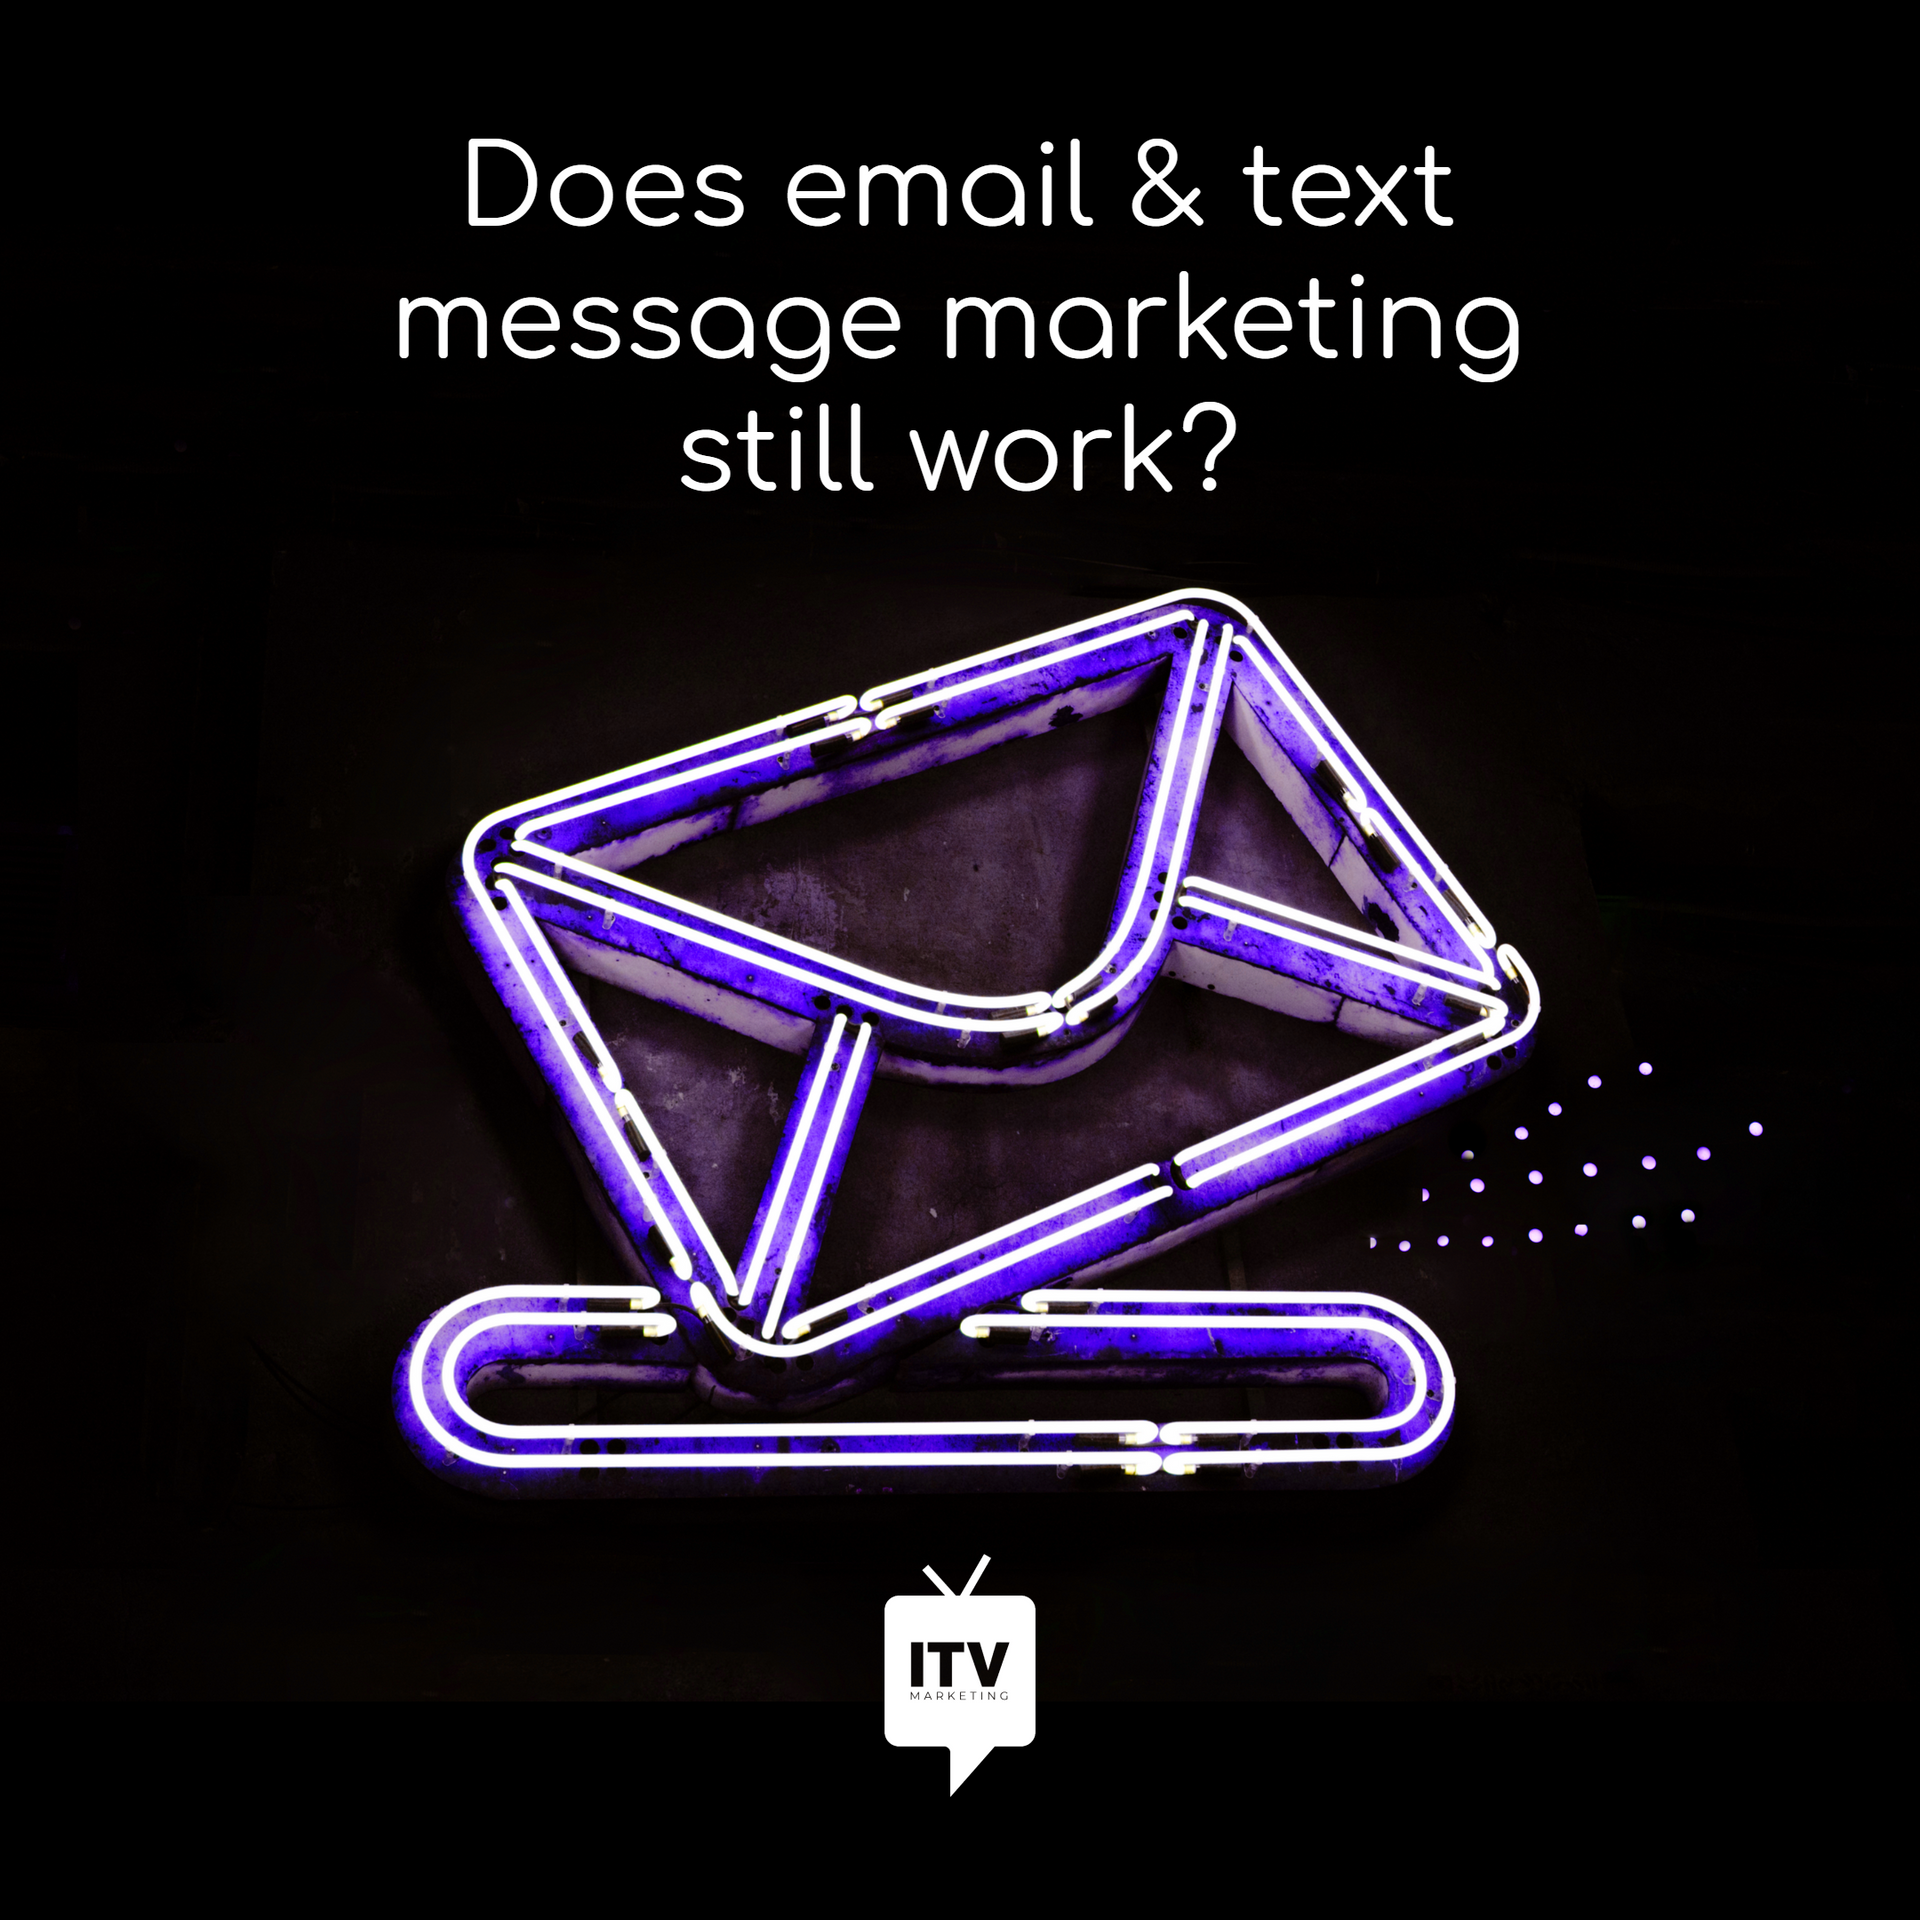 Does email & text message marketing still work?